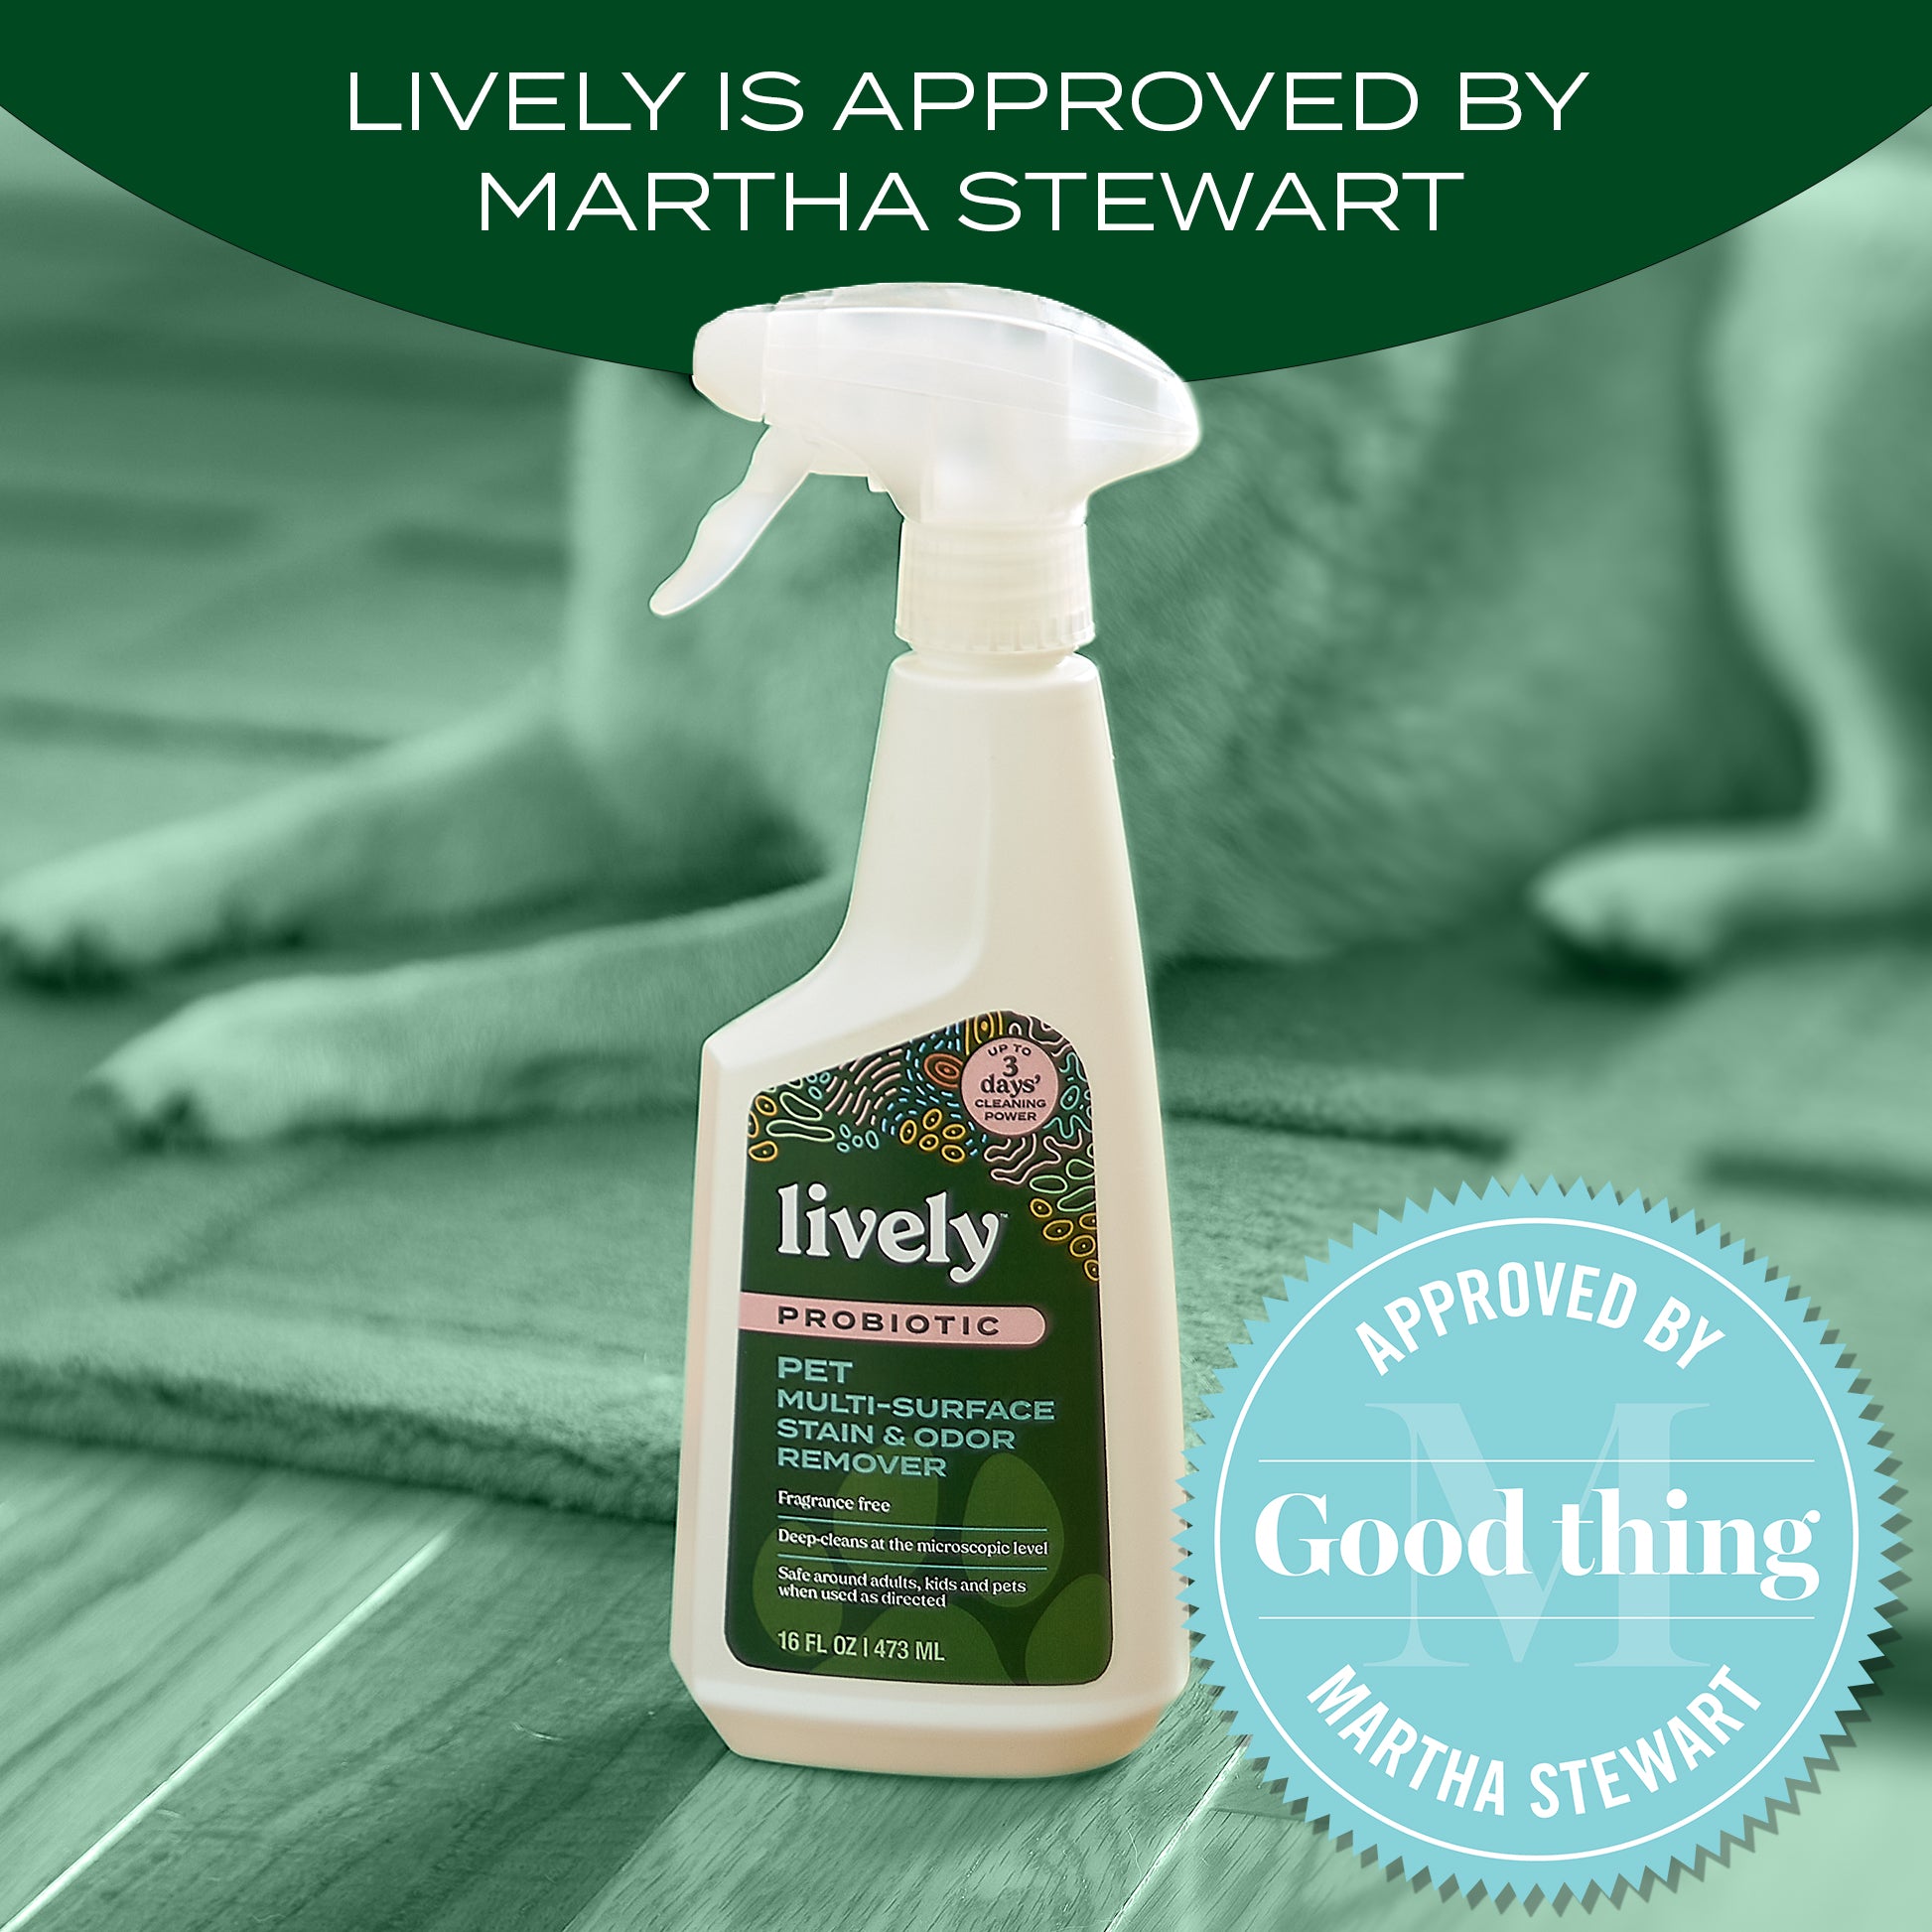 Pets - Odor & Stain Removers - Pure Modern Living